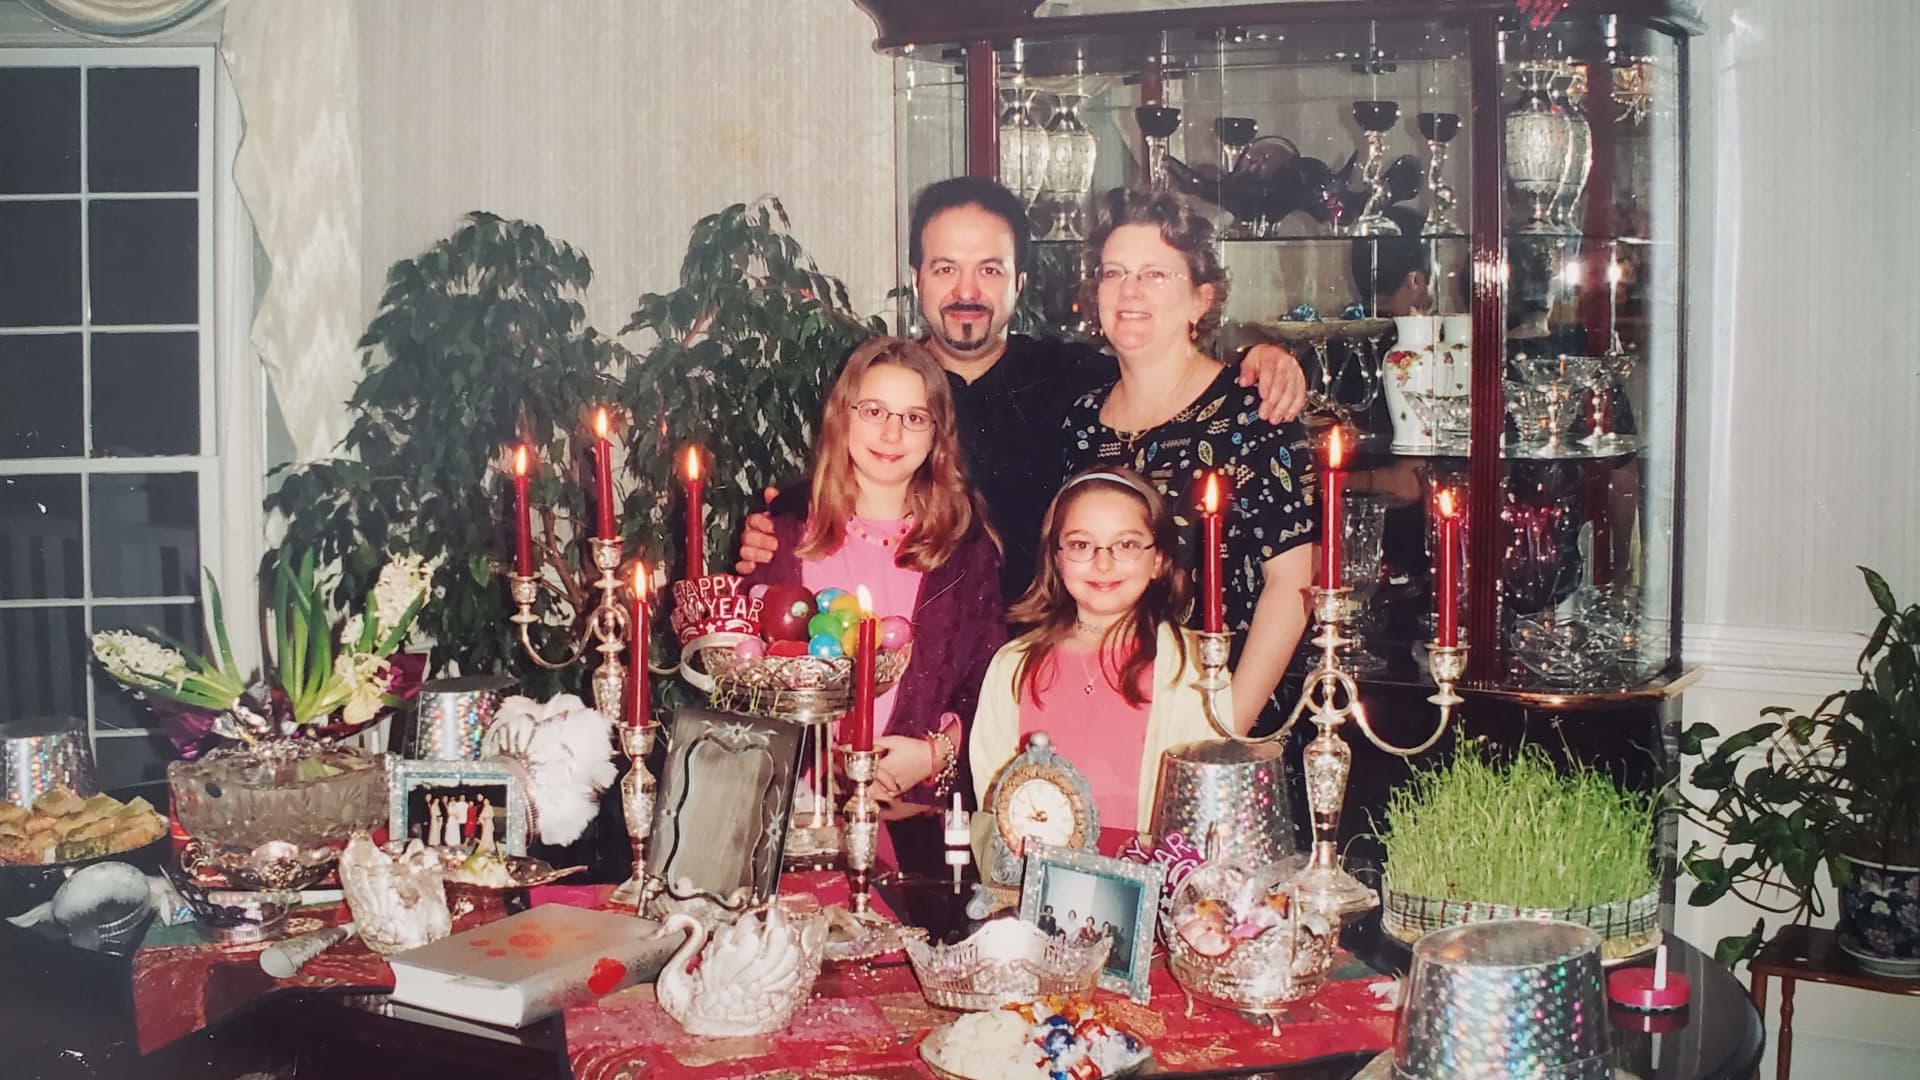 Leila Kartforosh (lower right) as a child with her family.